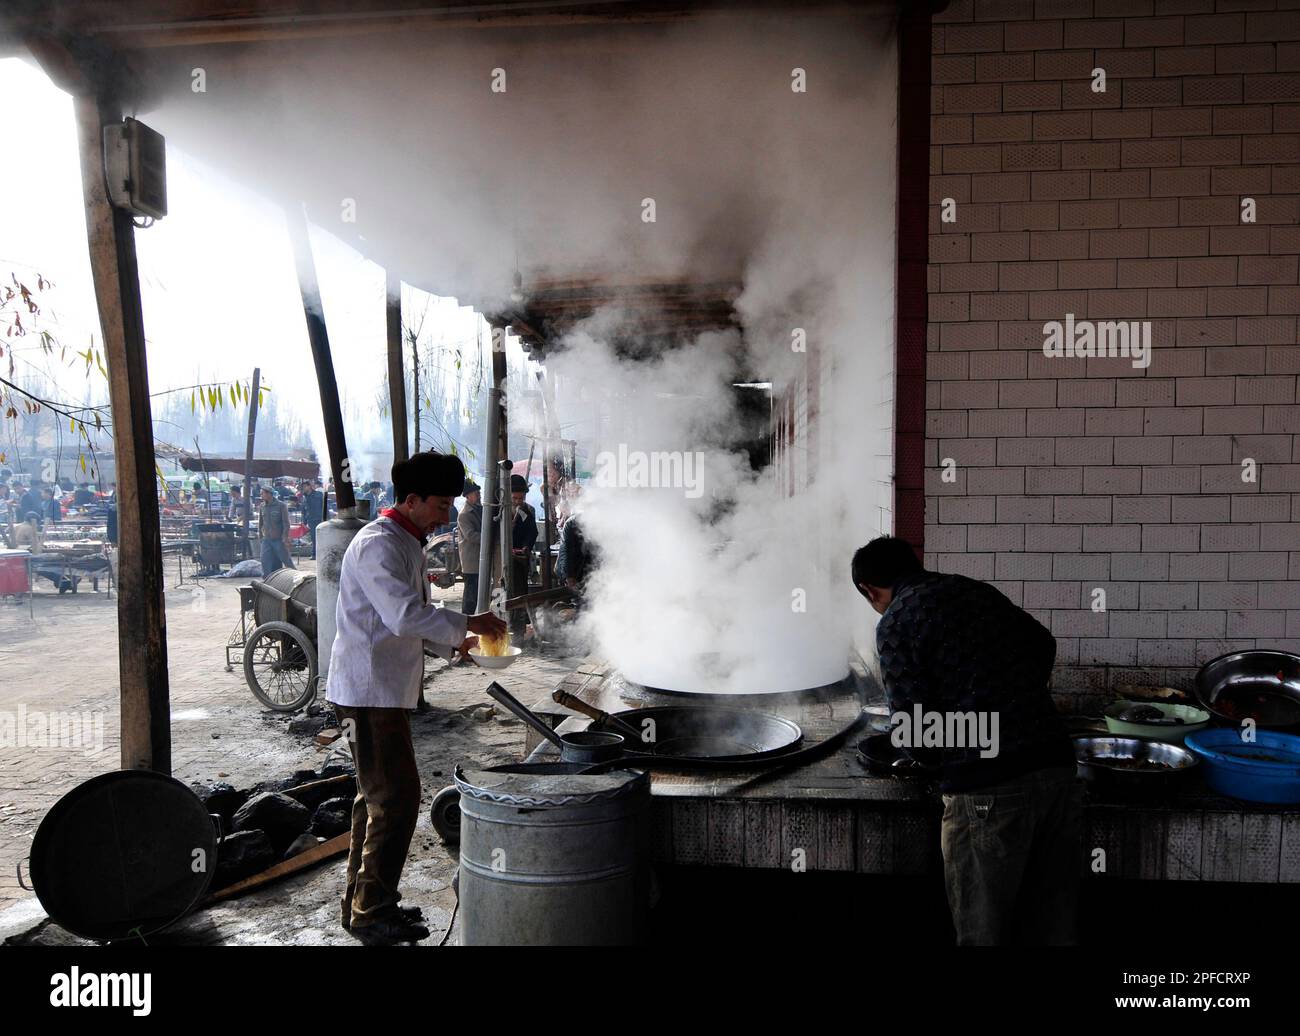 A small roadside restaurant serving Lagman noodles and rice with dumplings at a weekly livestock market in the outskirts of Kashgar, Xinjiang, China. Stock Photo